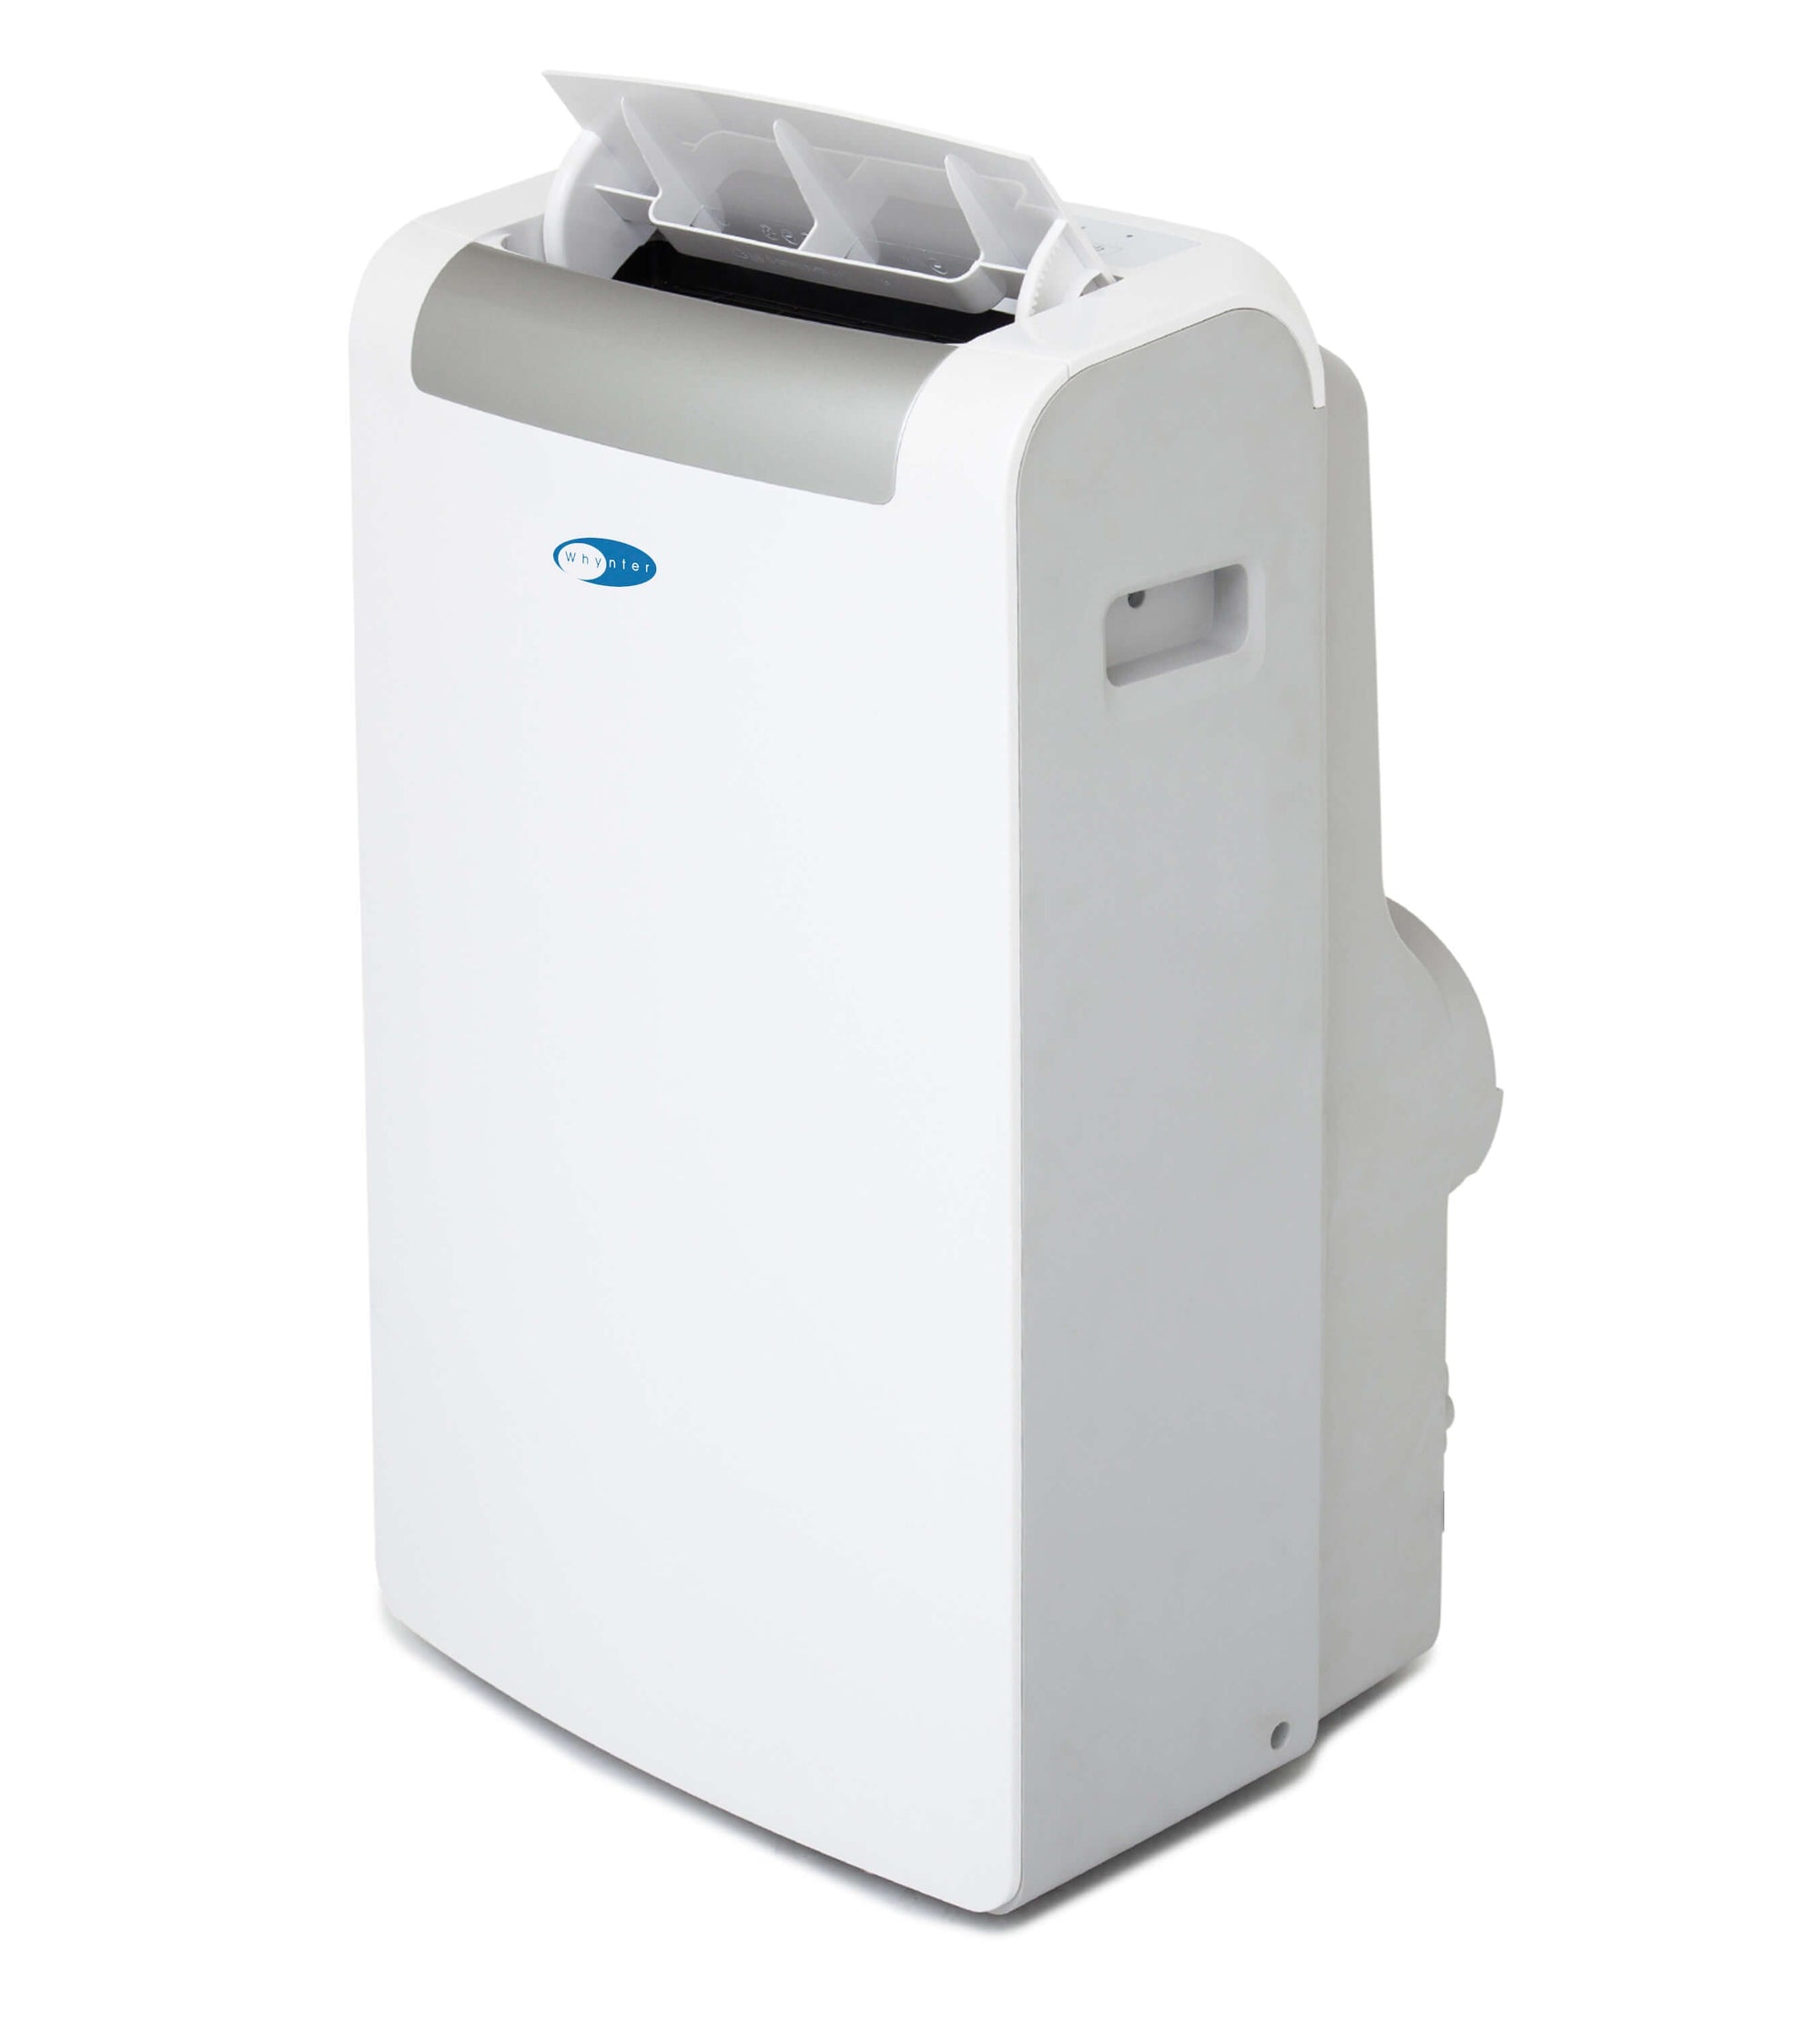 Whynter ARC-148MS 14,000 BTU Portable Air Conditioner with Dehumidifier and Silvershield Filter New